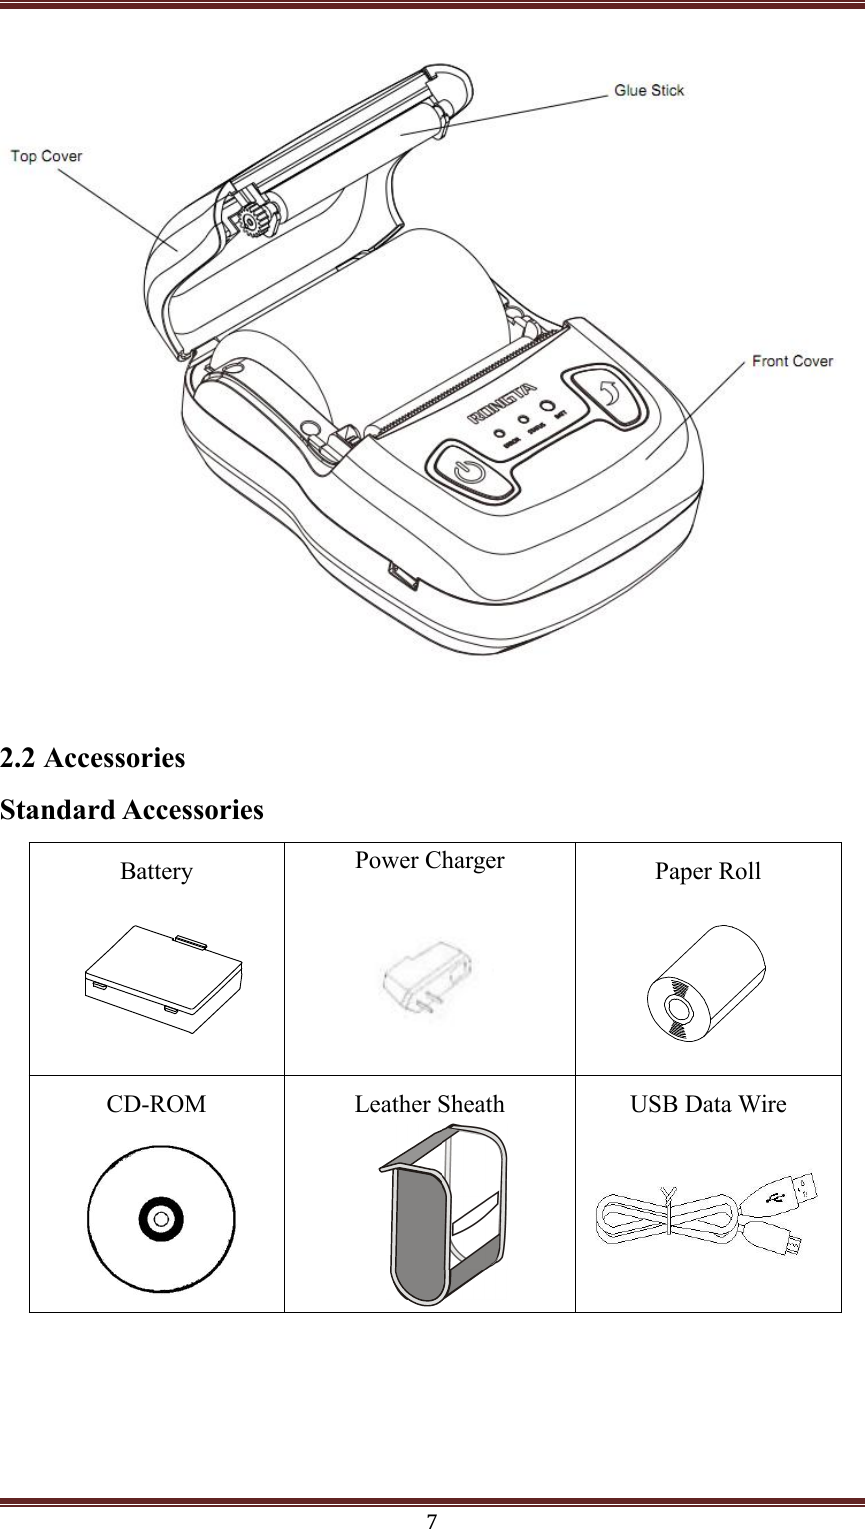 72.2 AccessoriesStandard AccessoriesBattery Power Charger Paper RollCD-ROM Leather Sheath USB Data Wire